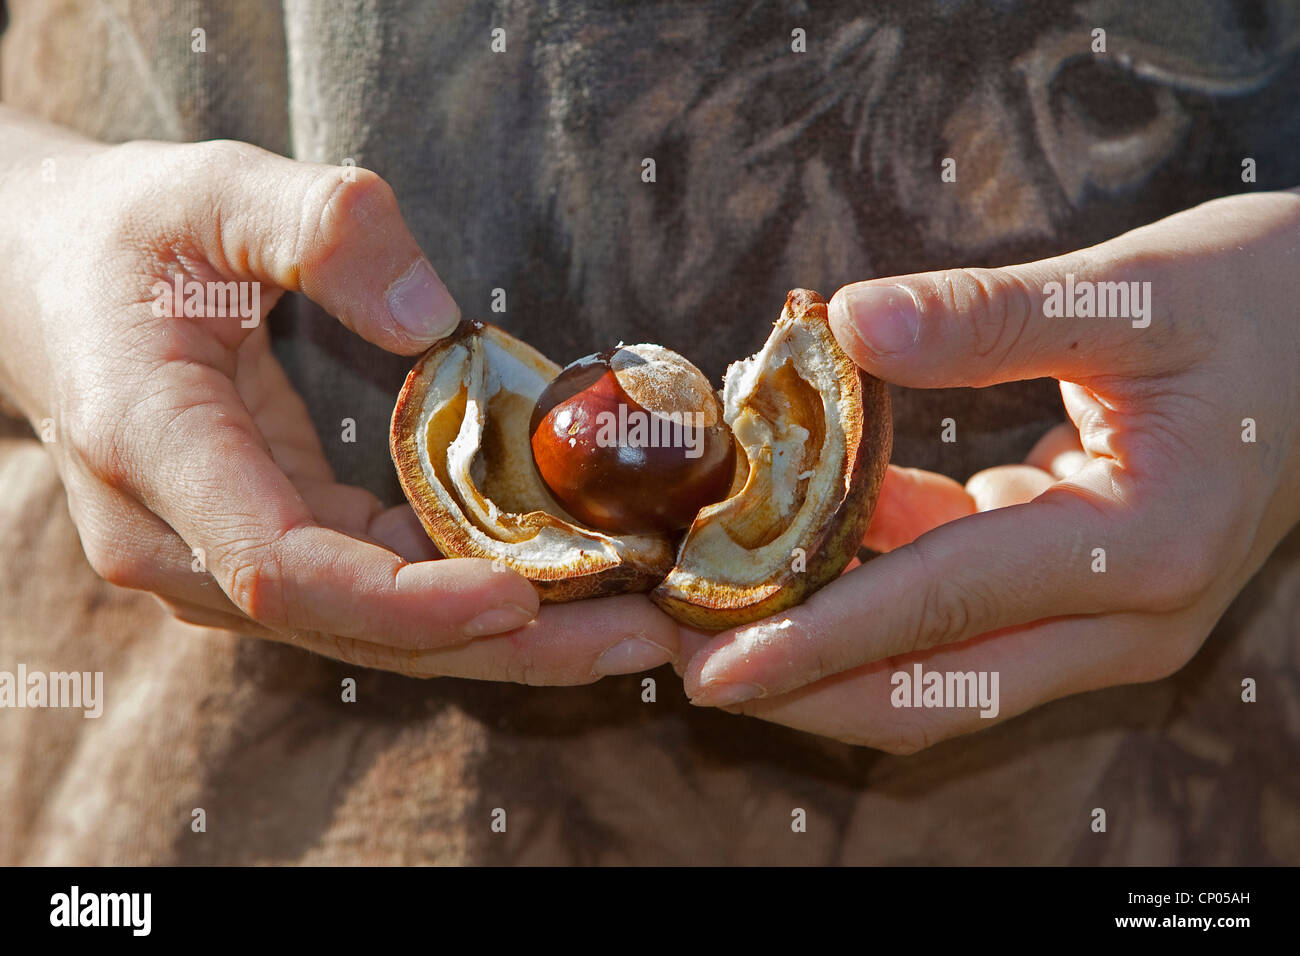 common horse chestnut (Aesculus hippocastanum), child opening a conker Stock Photo